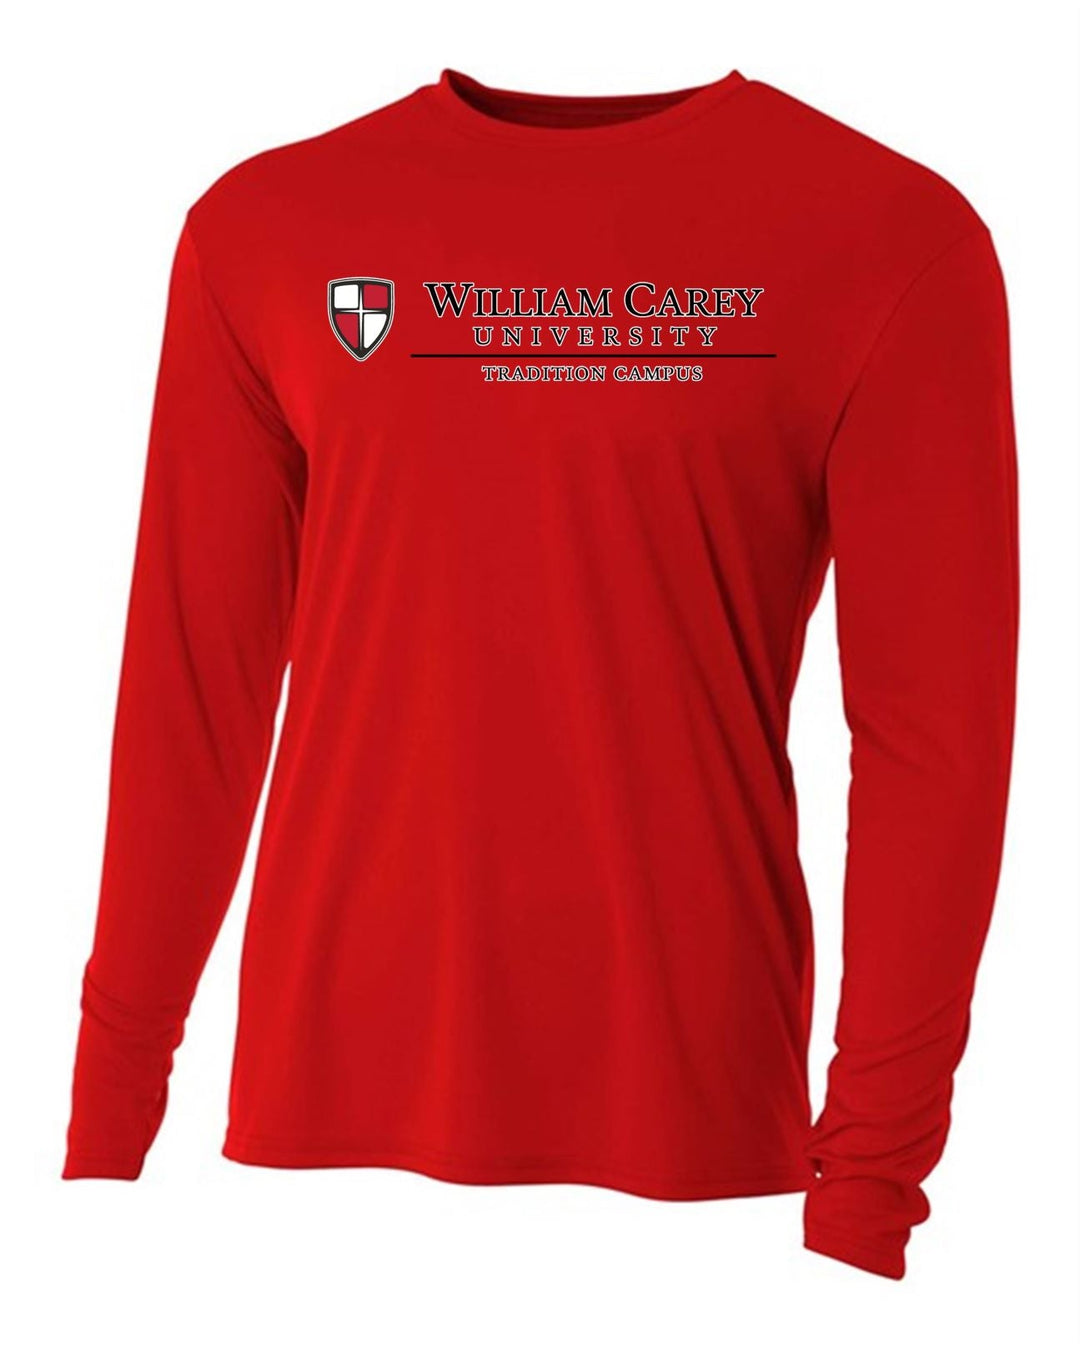 WCU Tradition Campus Youth Long-Sleeve Performance Shirt WCU TC Red Youth Small - Third Coast Soccer